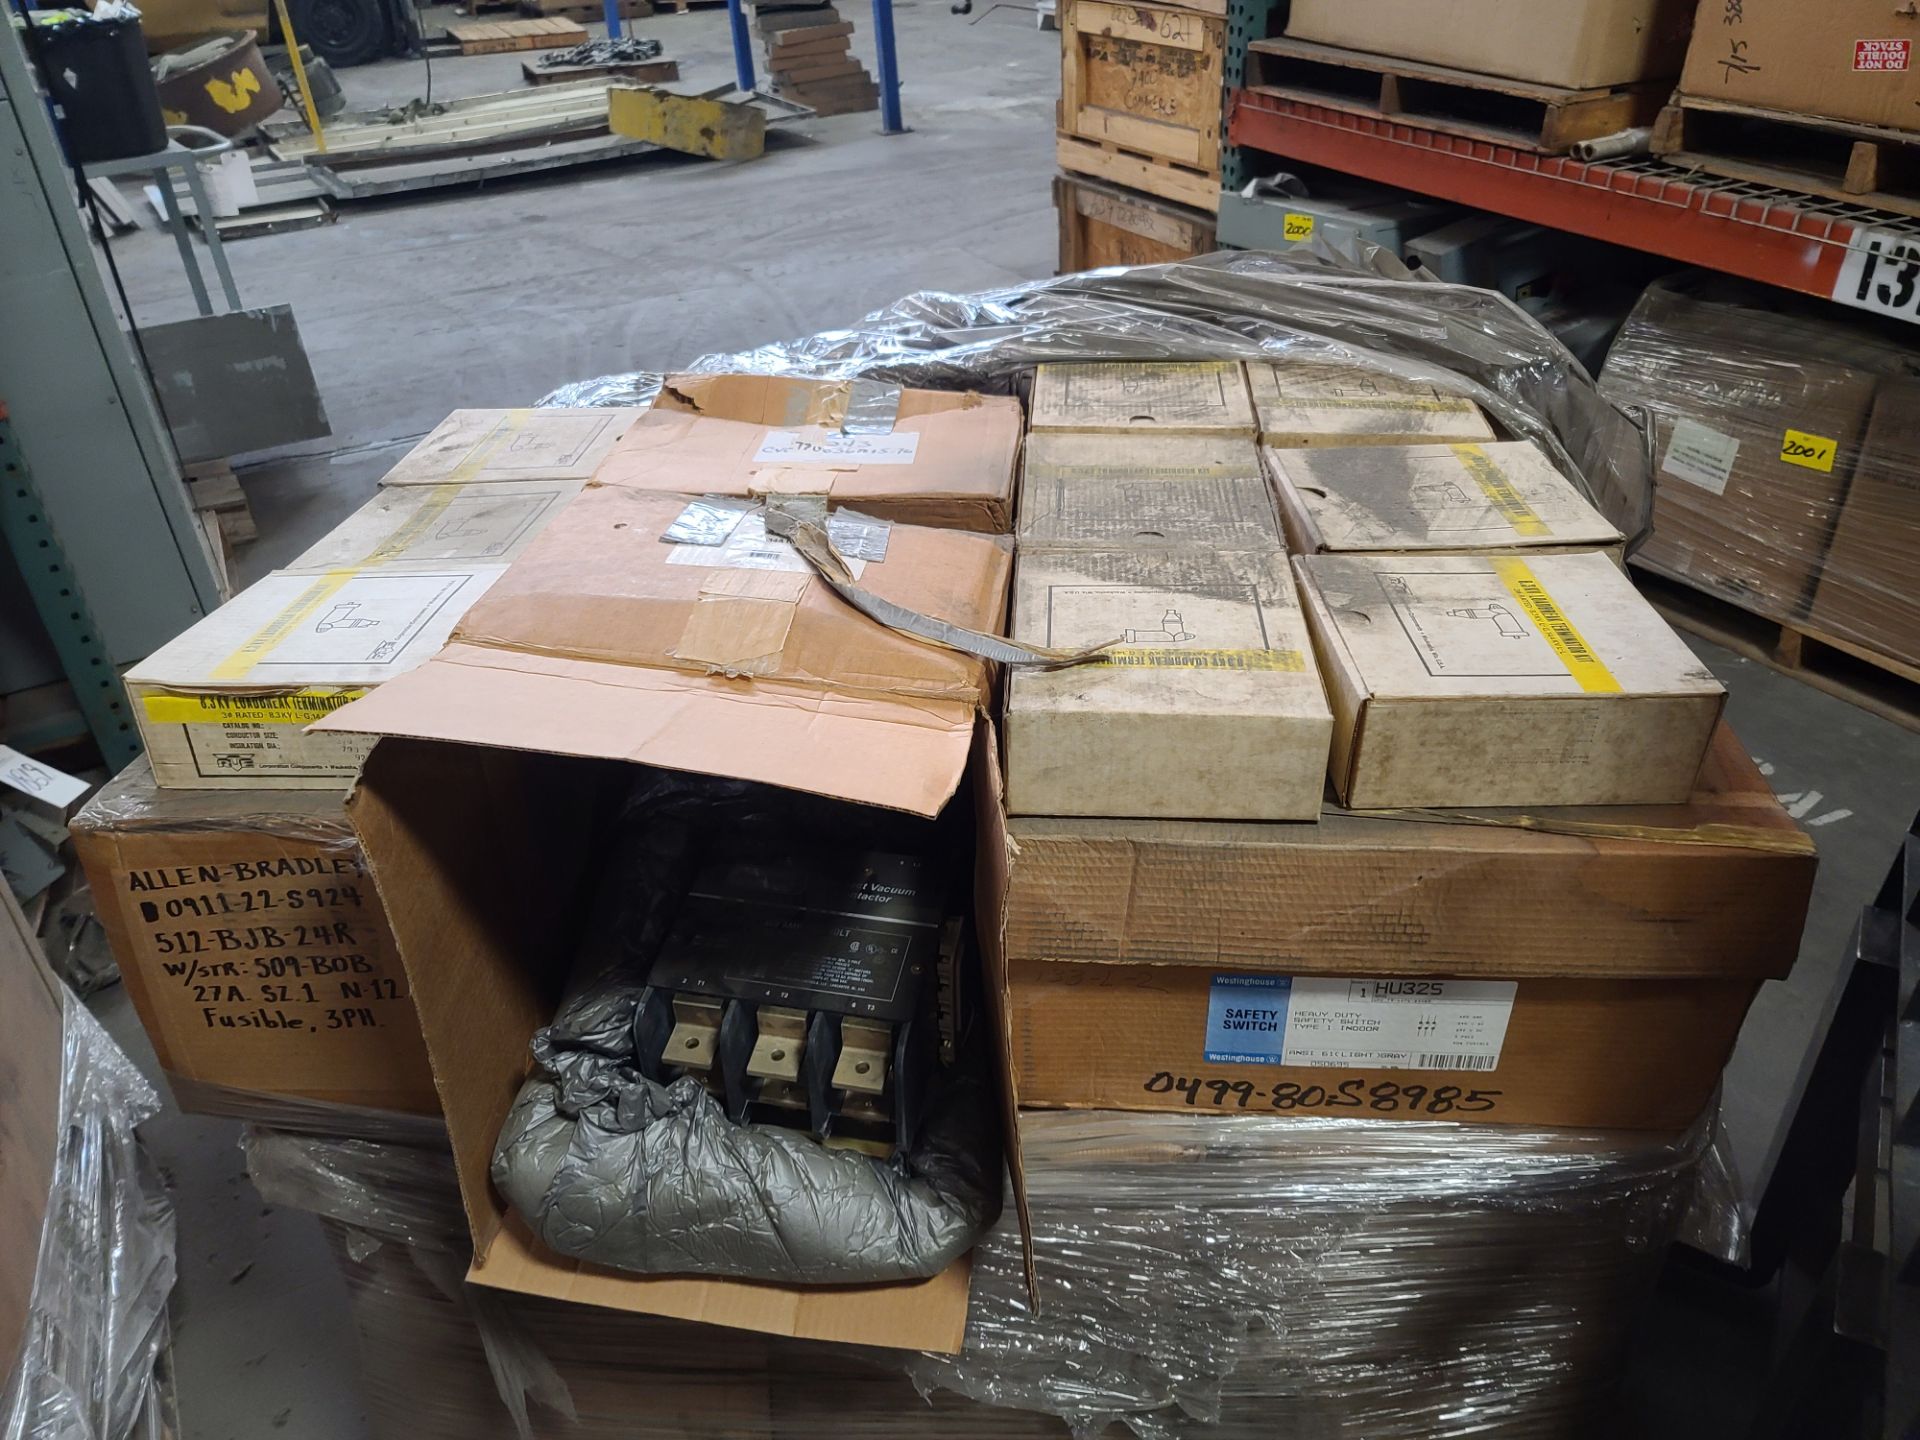 (Lot) West Safety Sws 50HU325 400A 240V, Assorted Plus More Surplus (LOADING FEES: $30) - Image 3 of 9